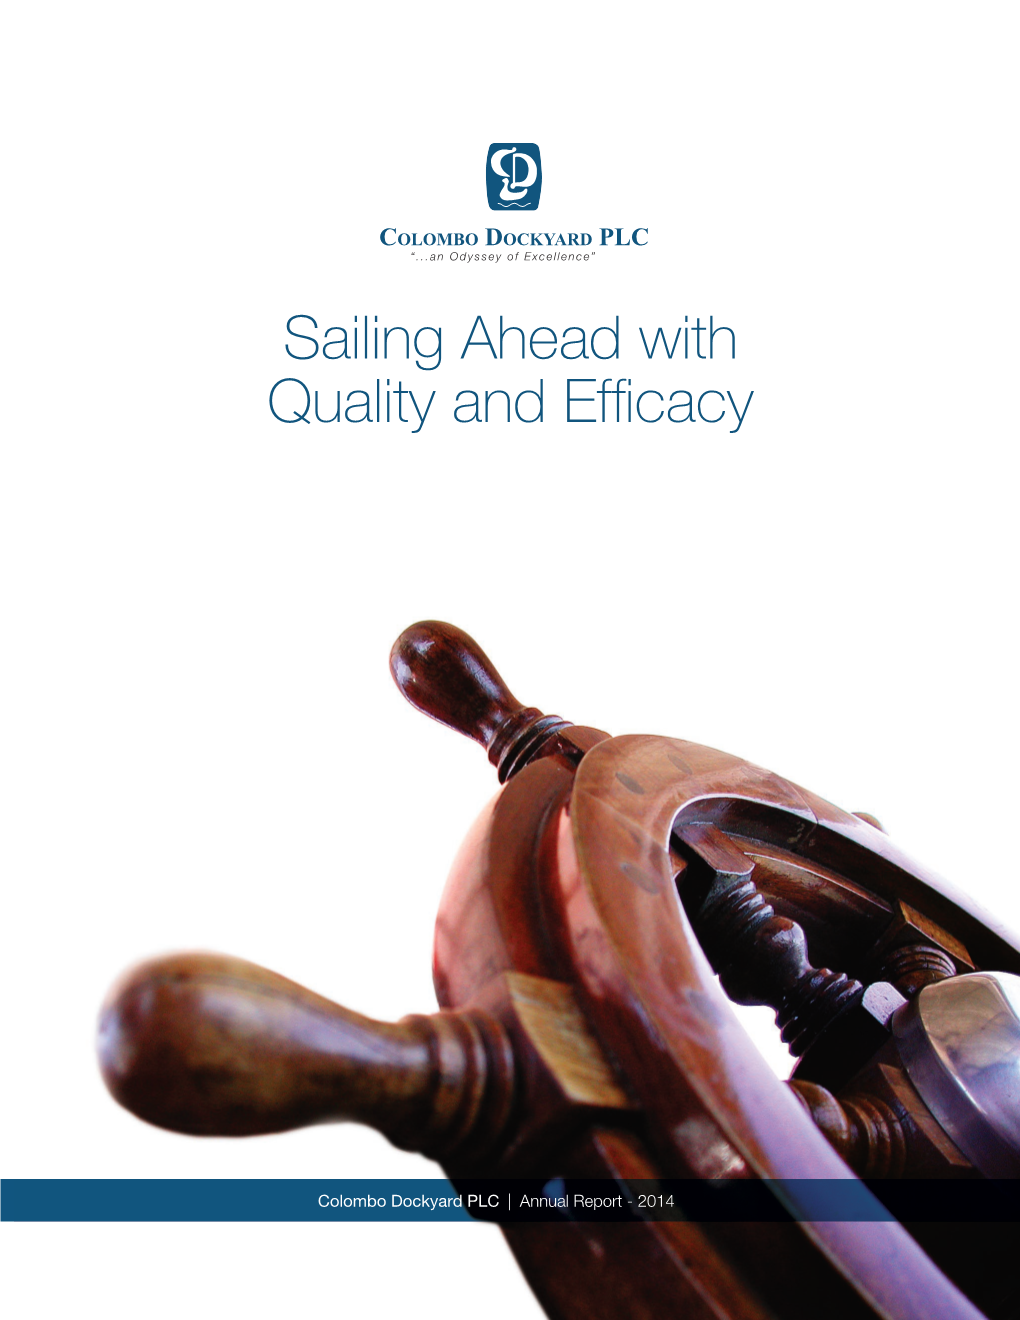 Sailing Ahead with Quality and Efficacy